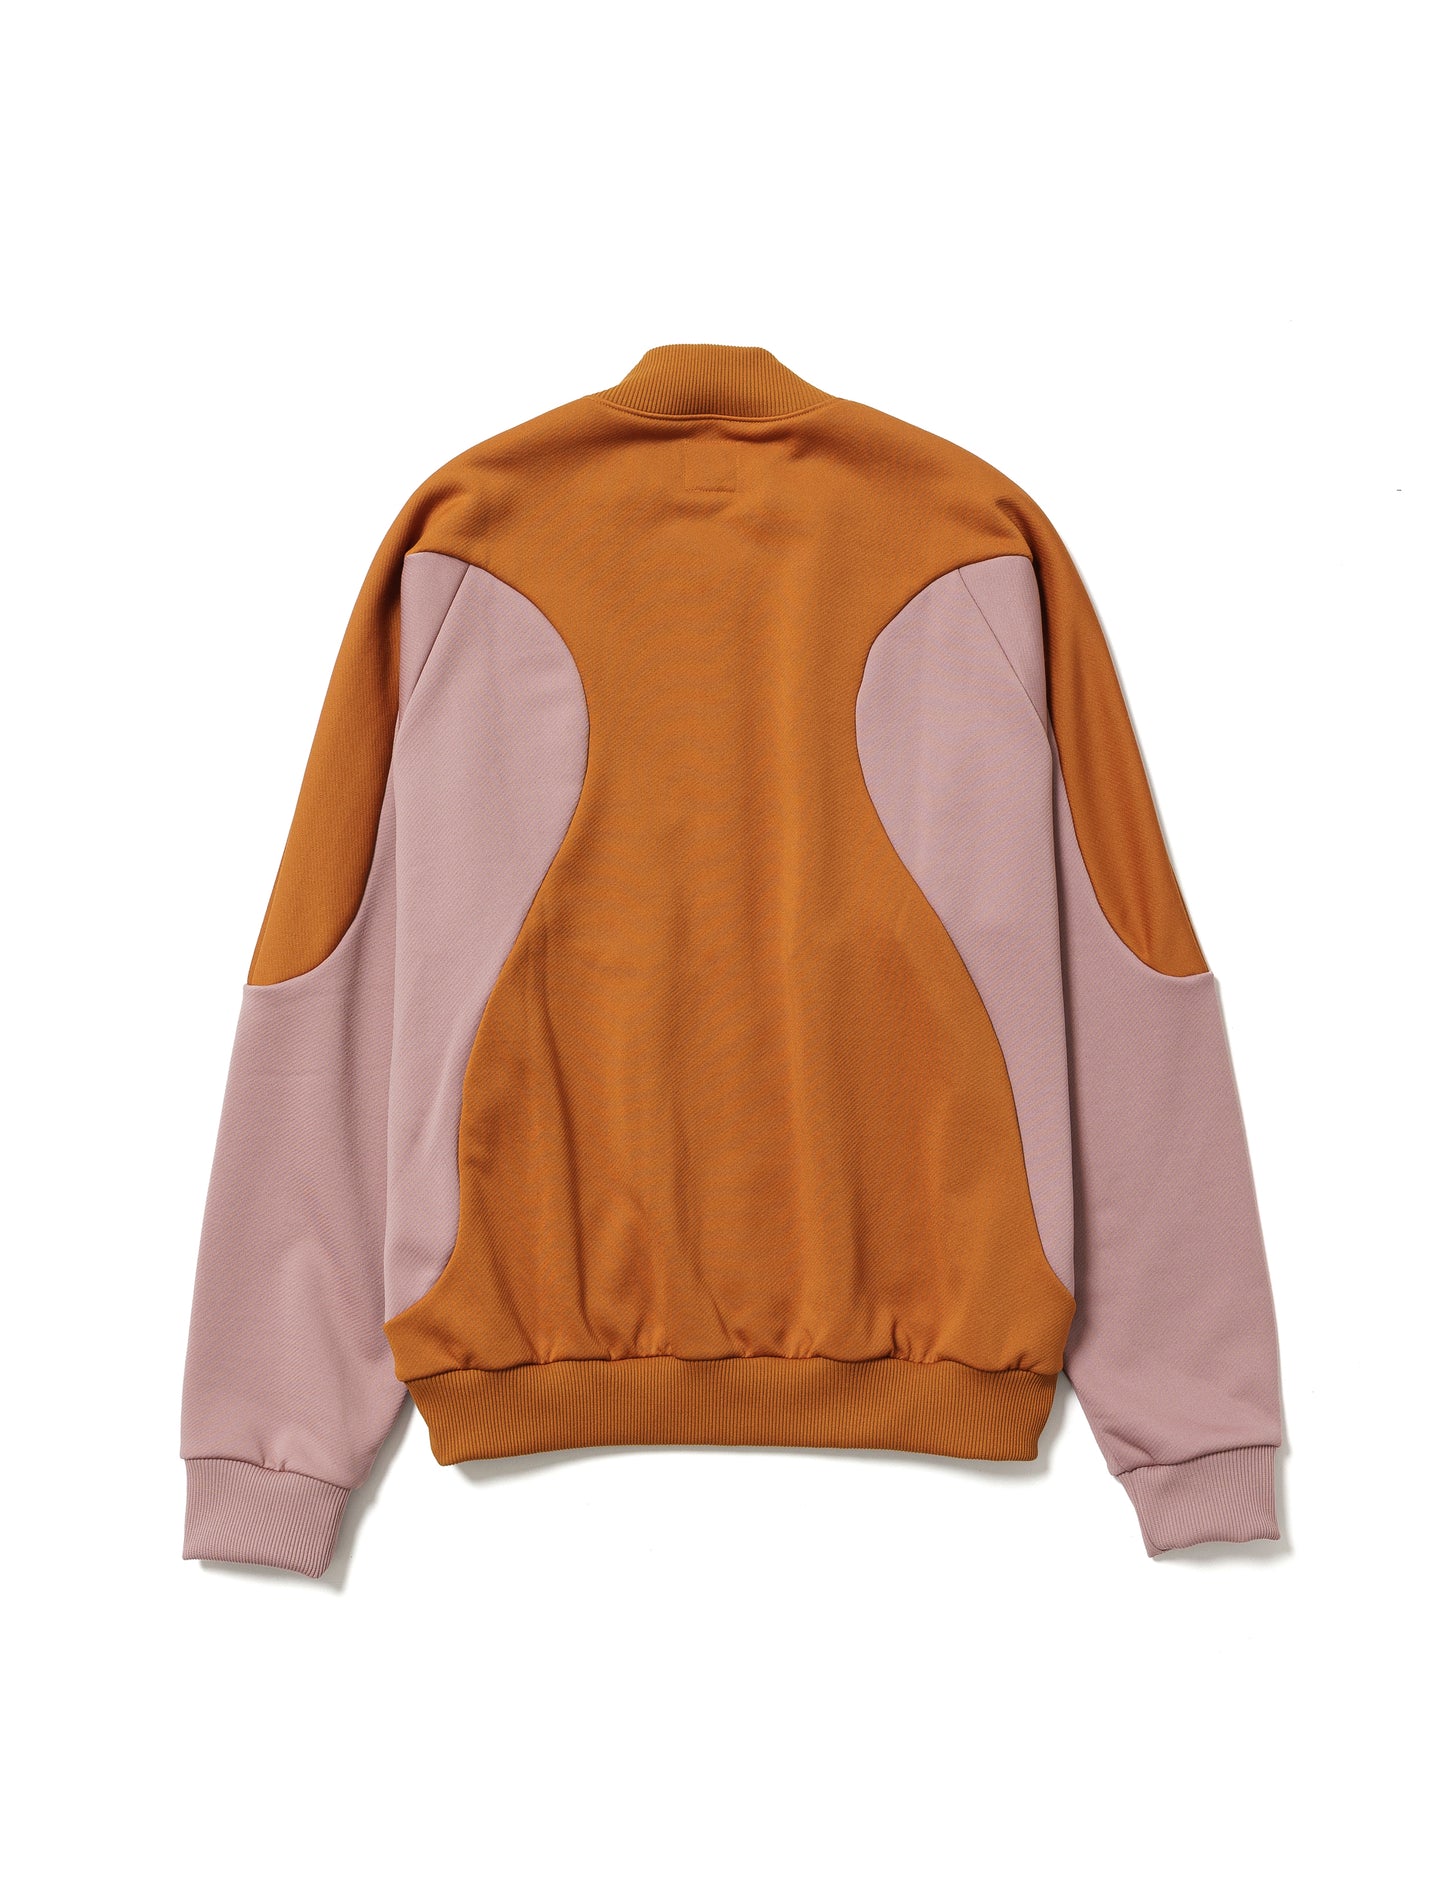 24SS-CSS-003 / RETRO FUTURE TRACK JACKET / BROWN × PINK